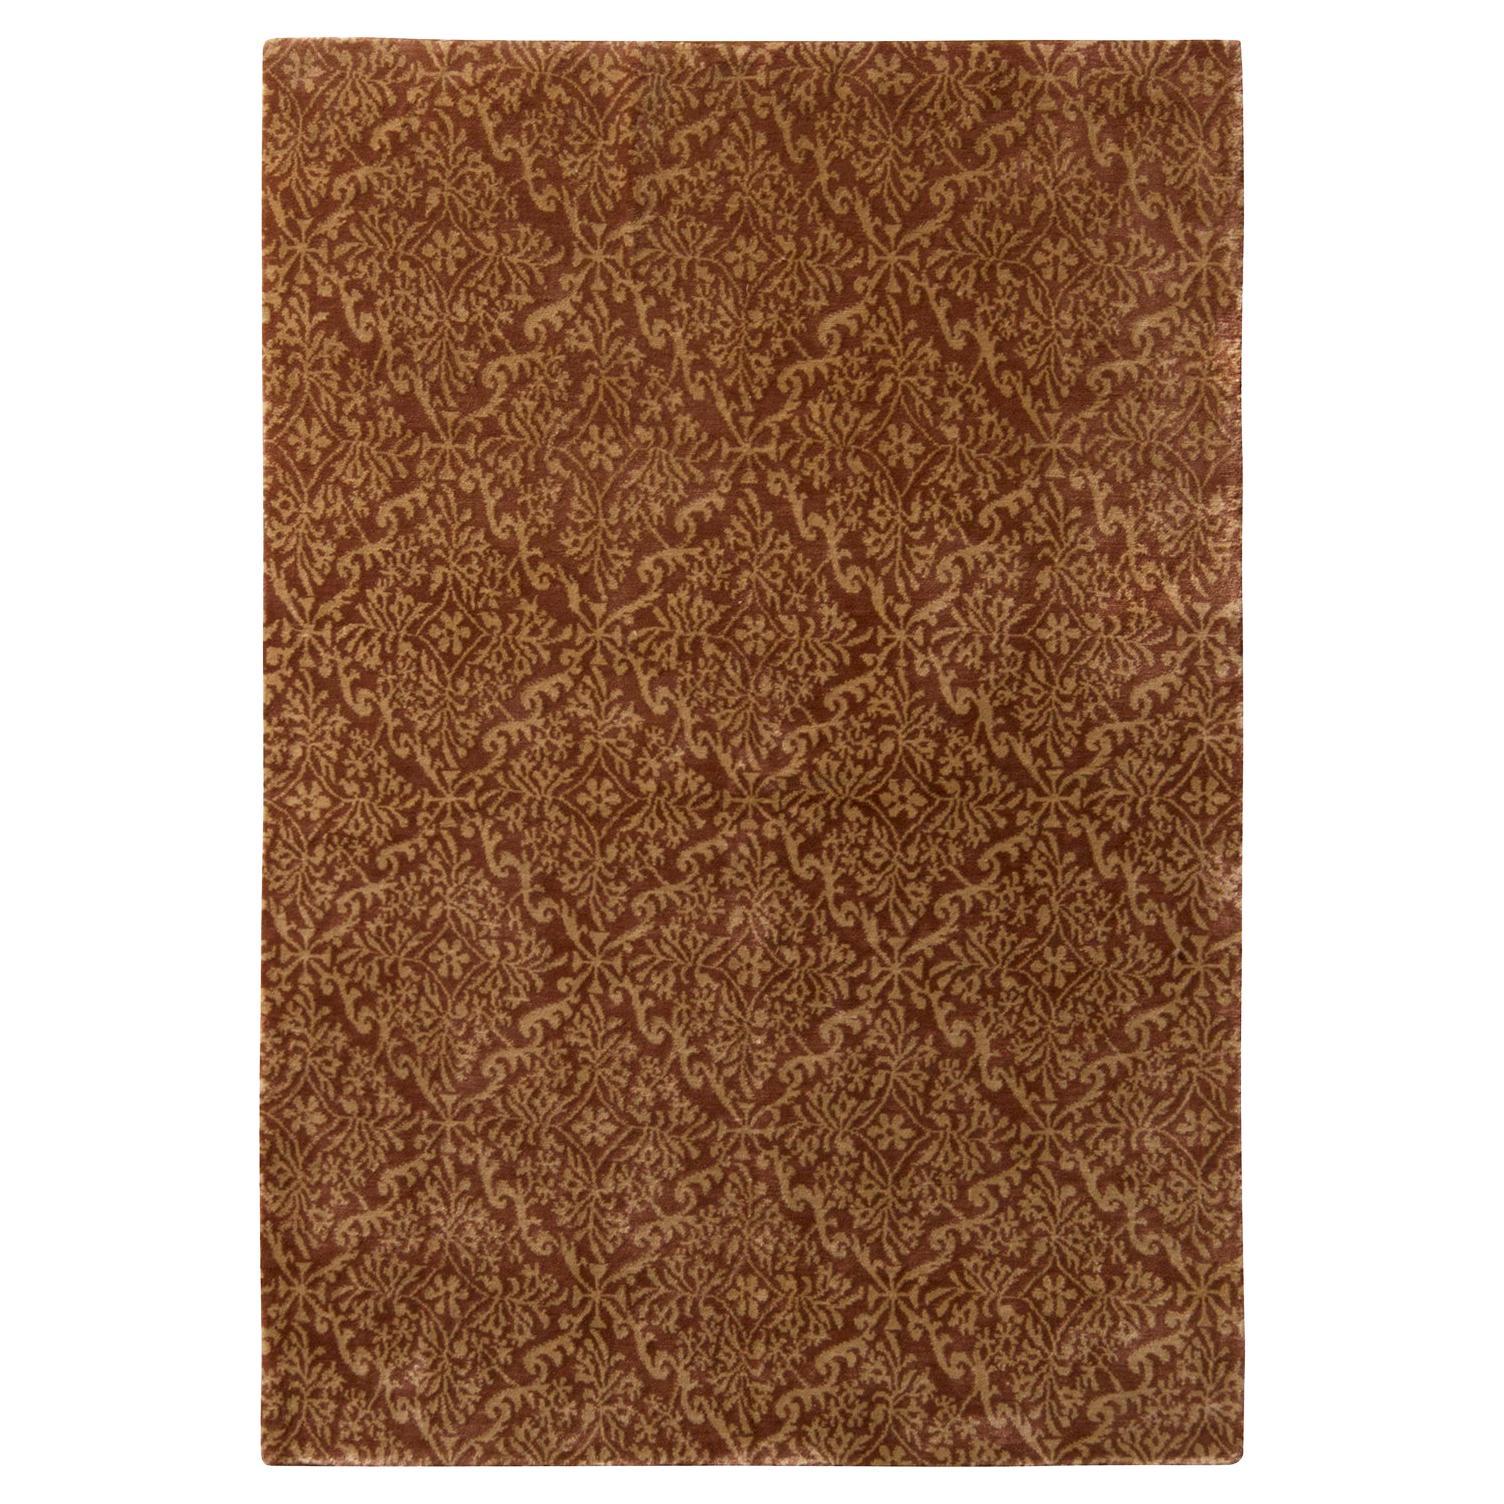 Rug & Kilim's Classic European Style Rug in All over Brown, Gold Floral Pattern